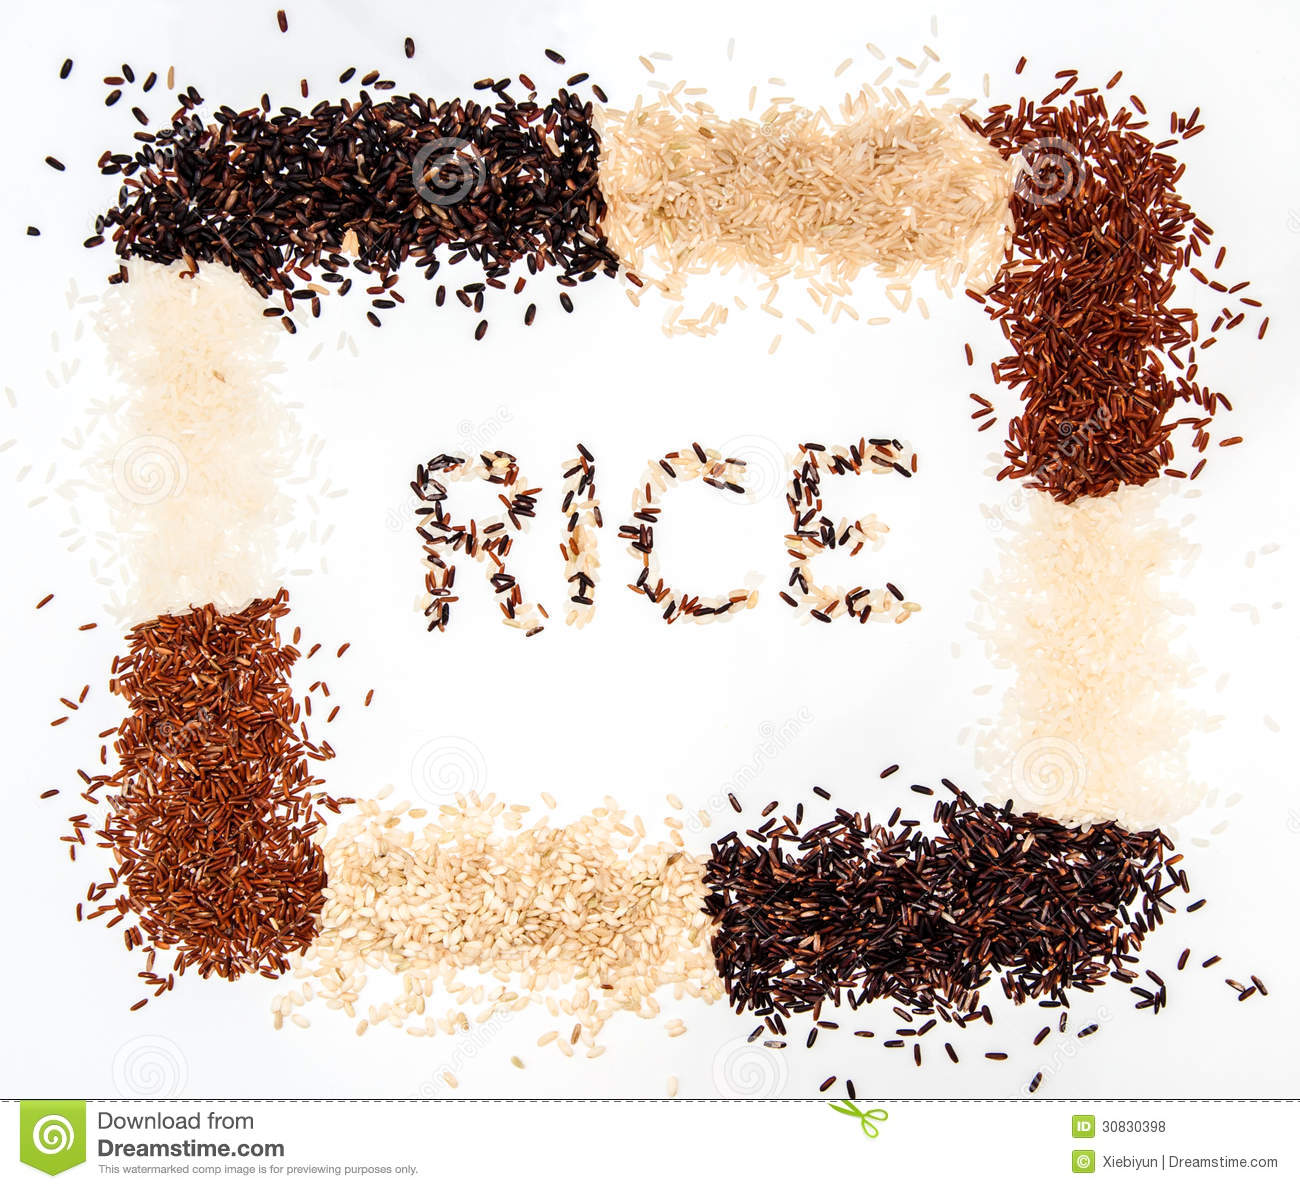 Rice Collection On White Background Royalty Free Stock Photos   Image